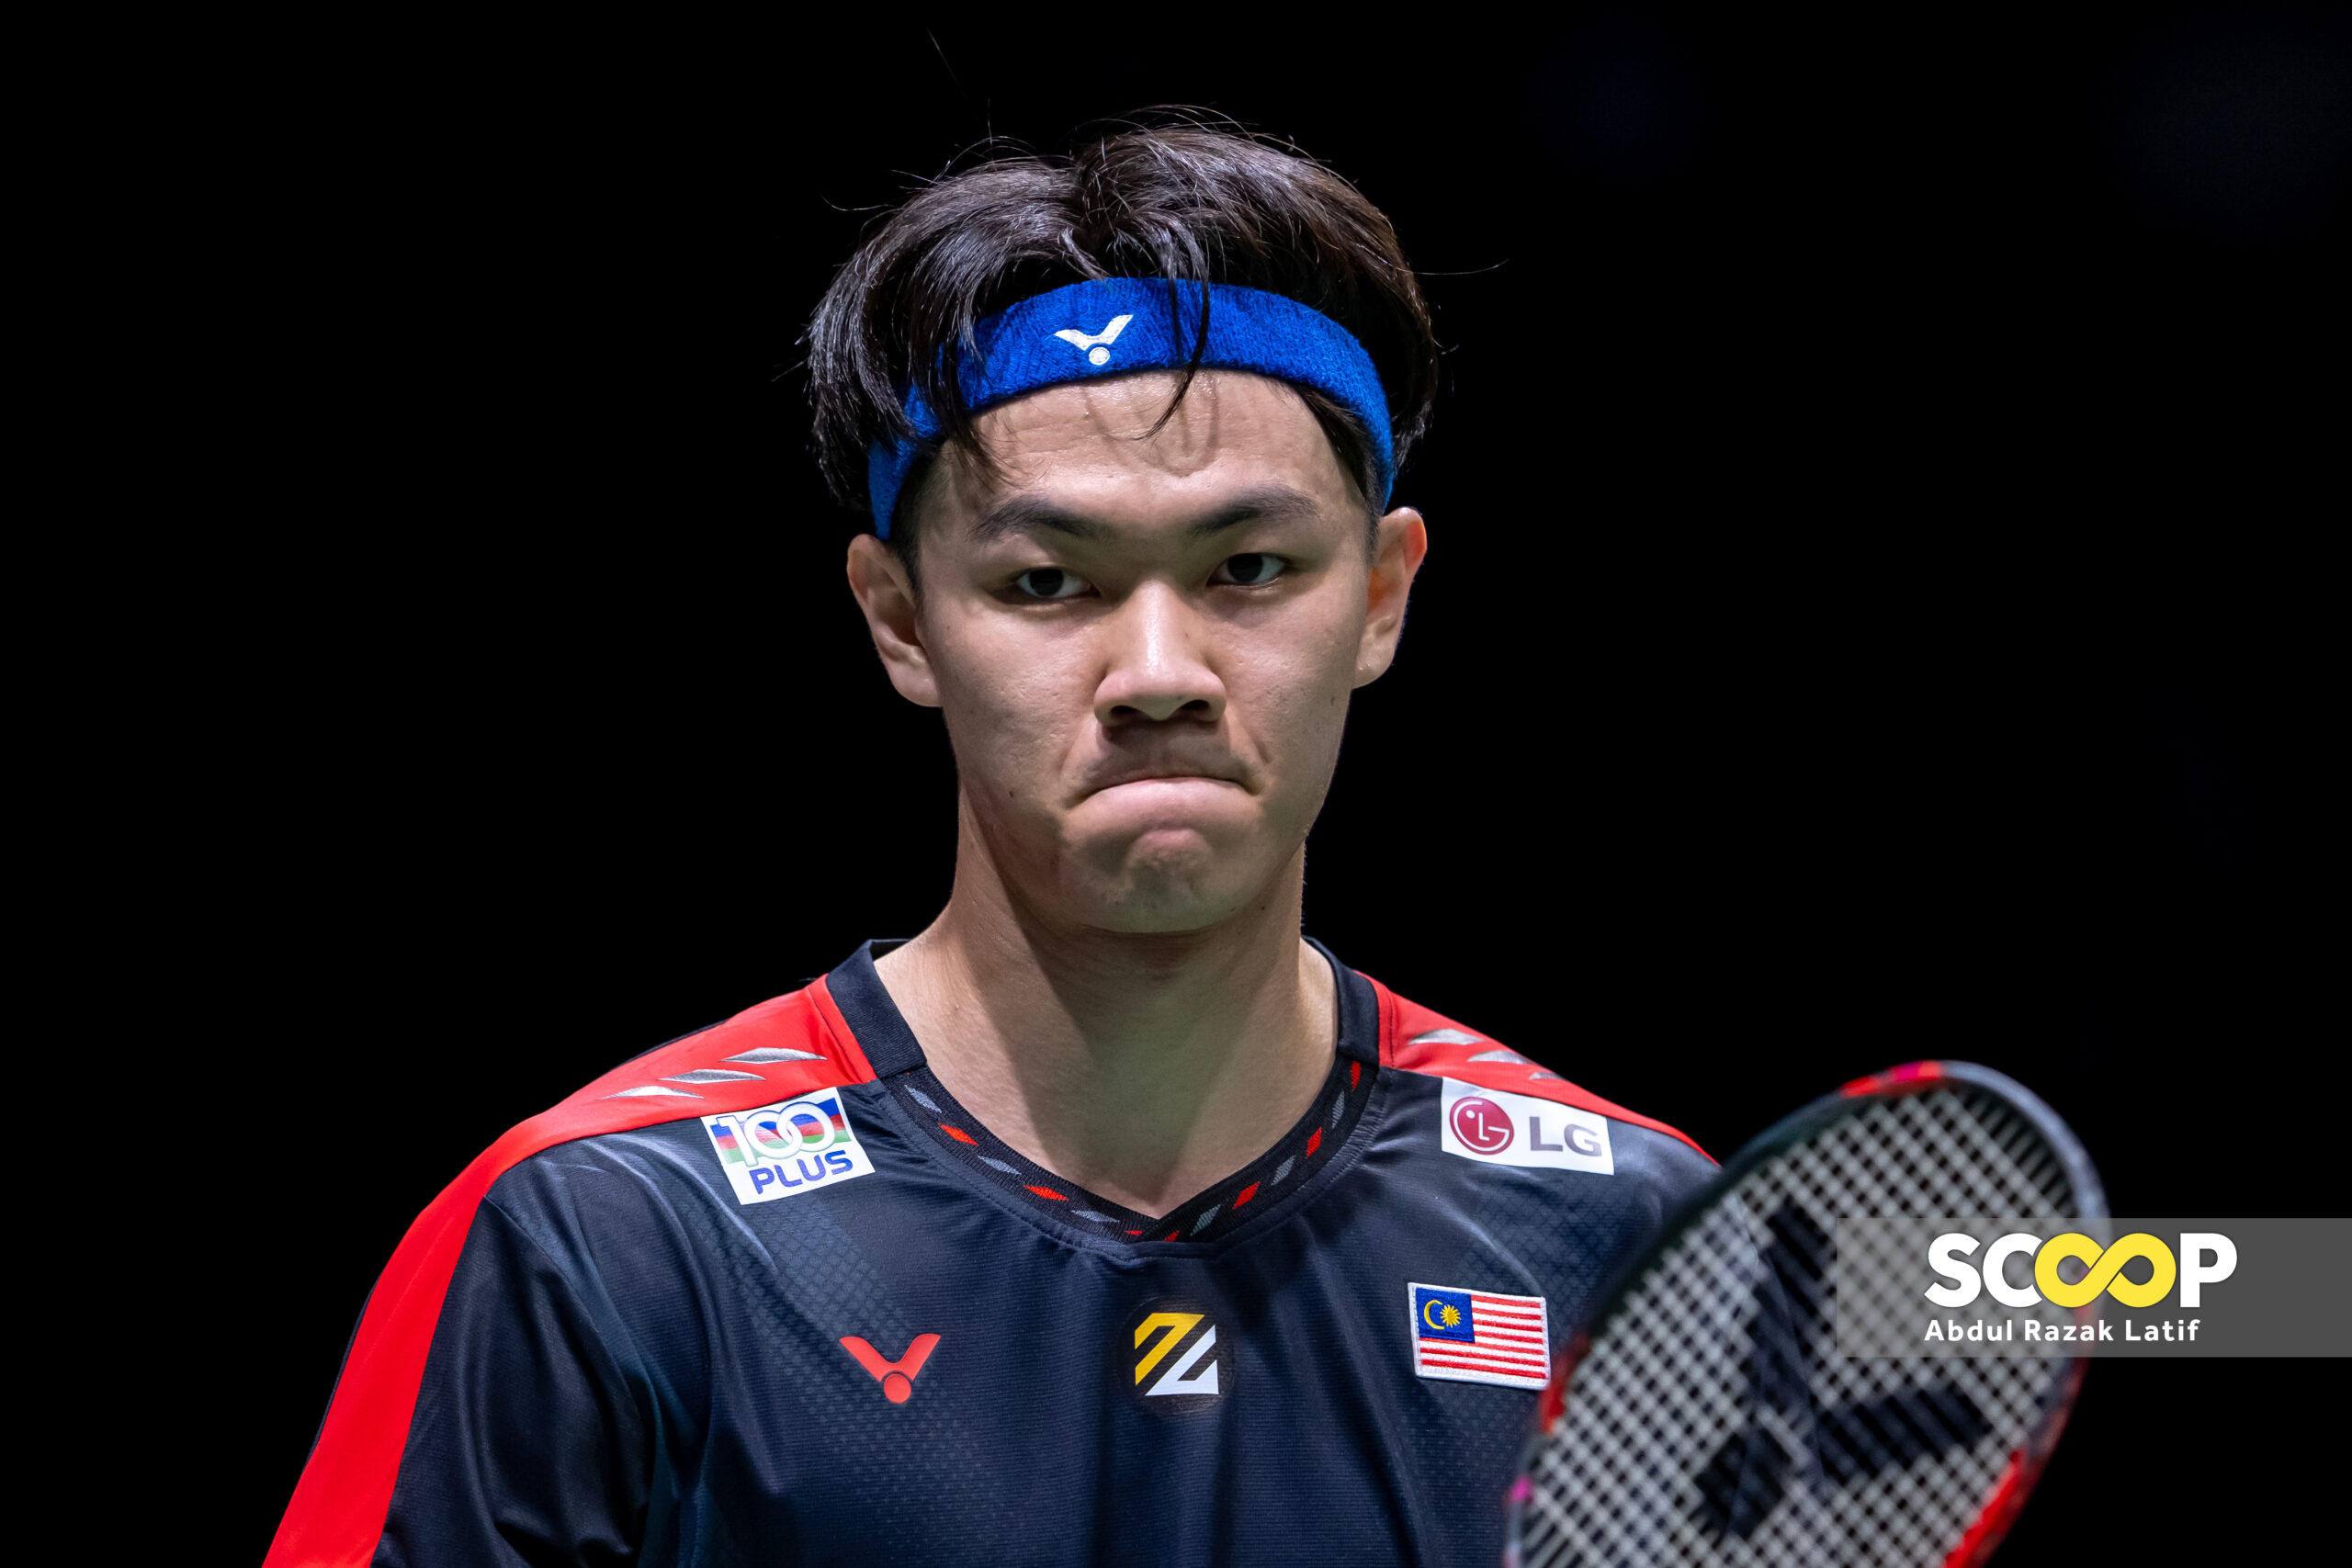 [UPDATED] Malaysia Open: home hope Zii Jia fails to spark in sorry first-round exit